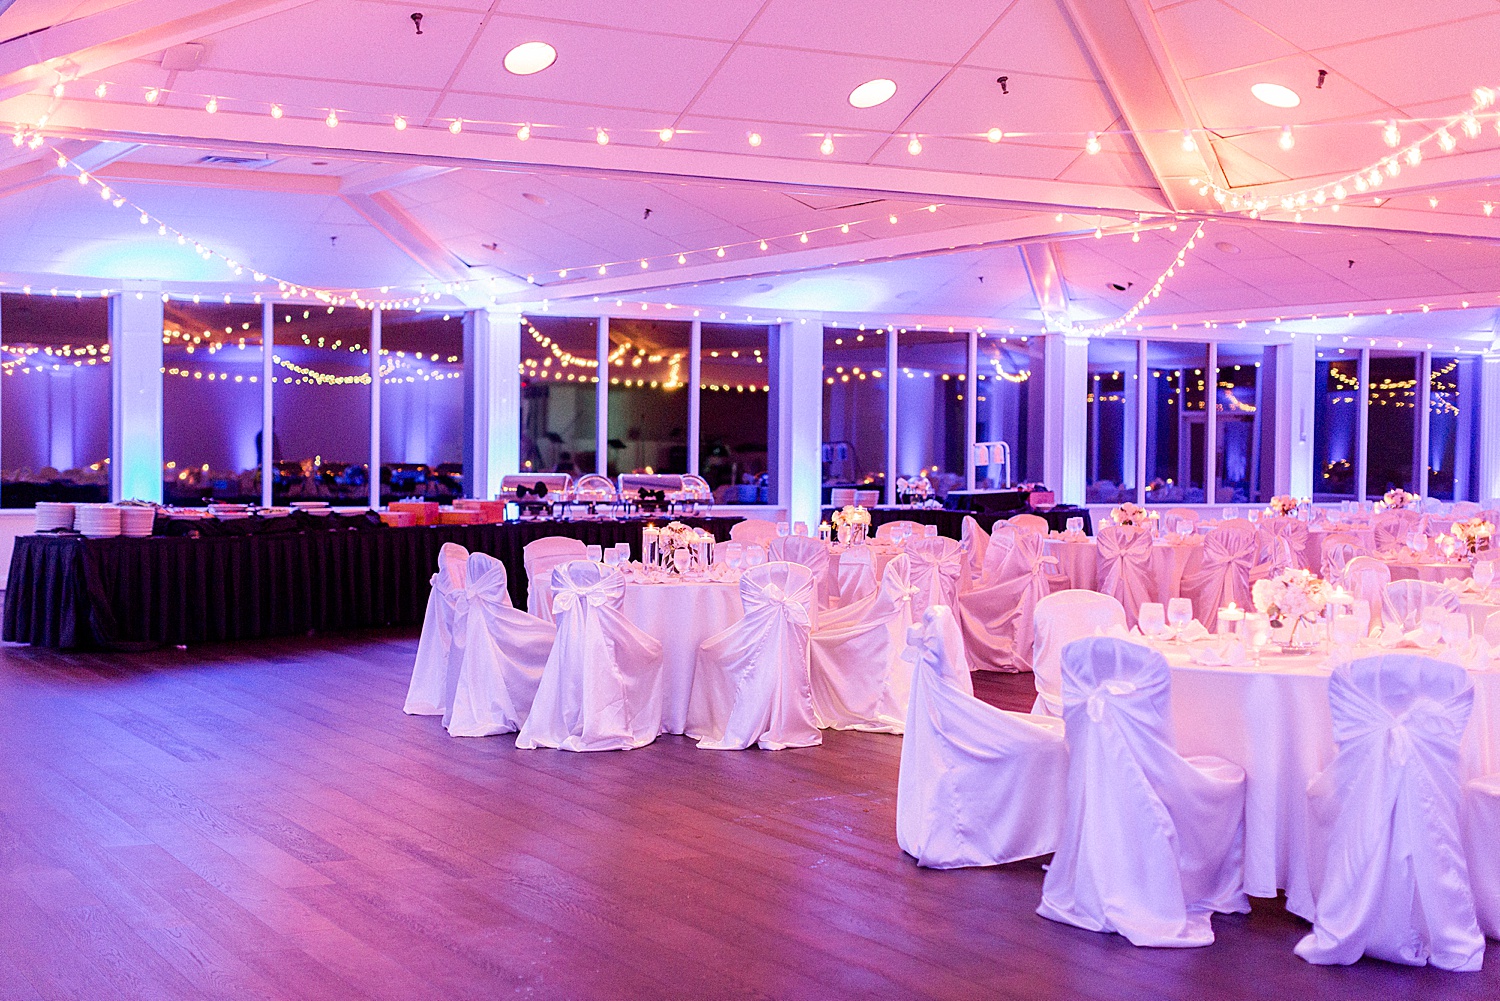 Wedding Reception Details at the Pine Tree Country Club